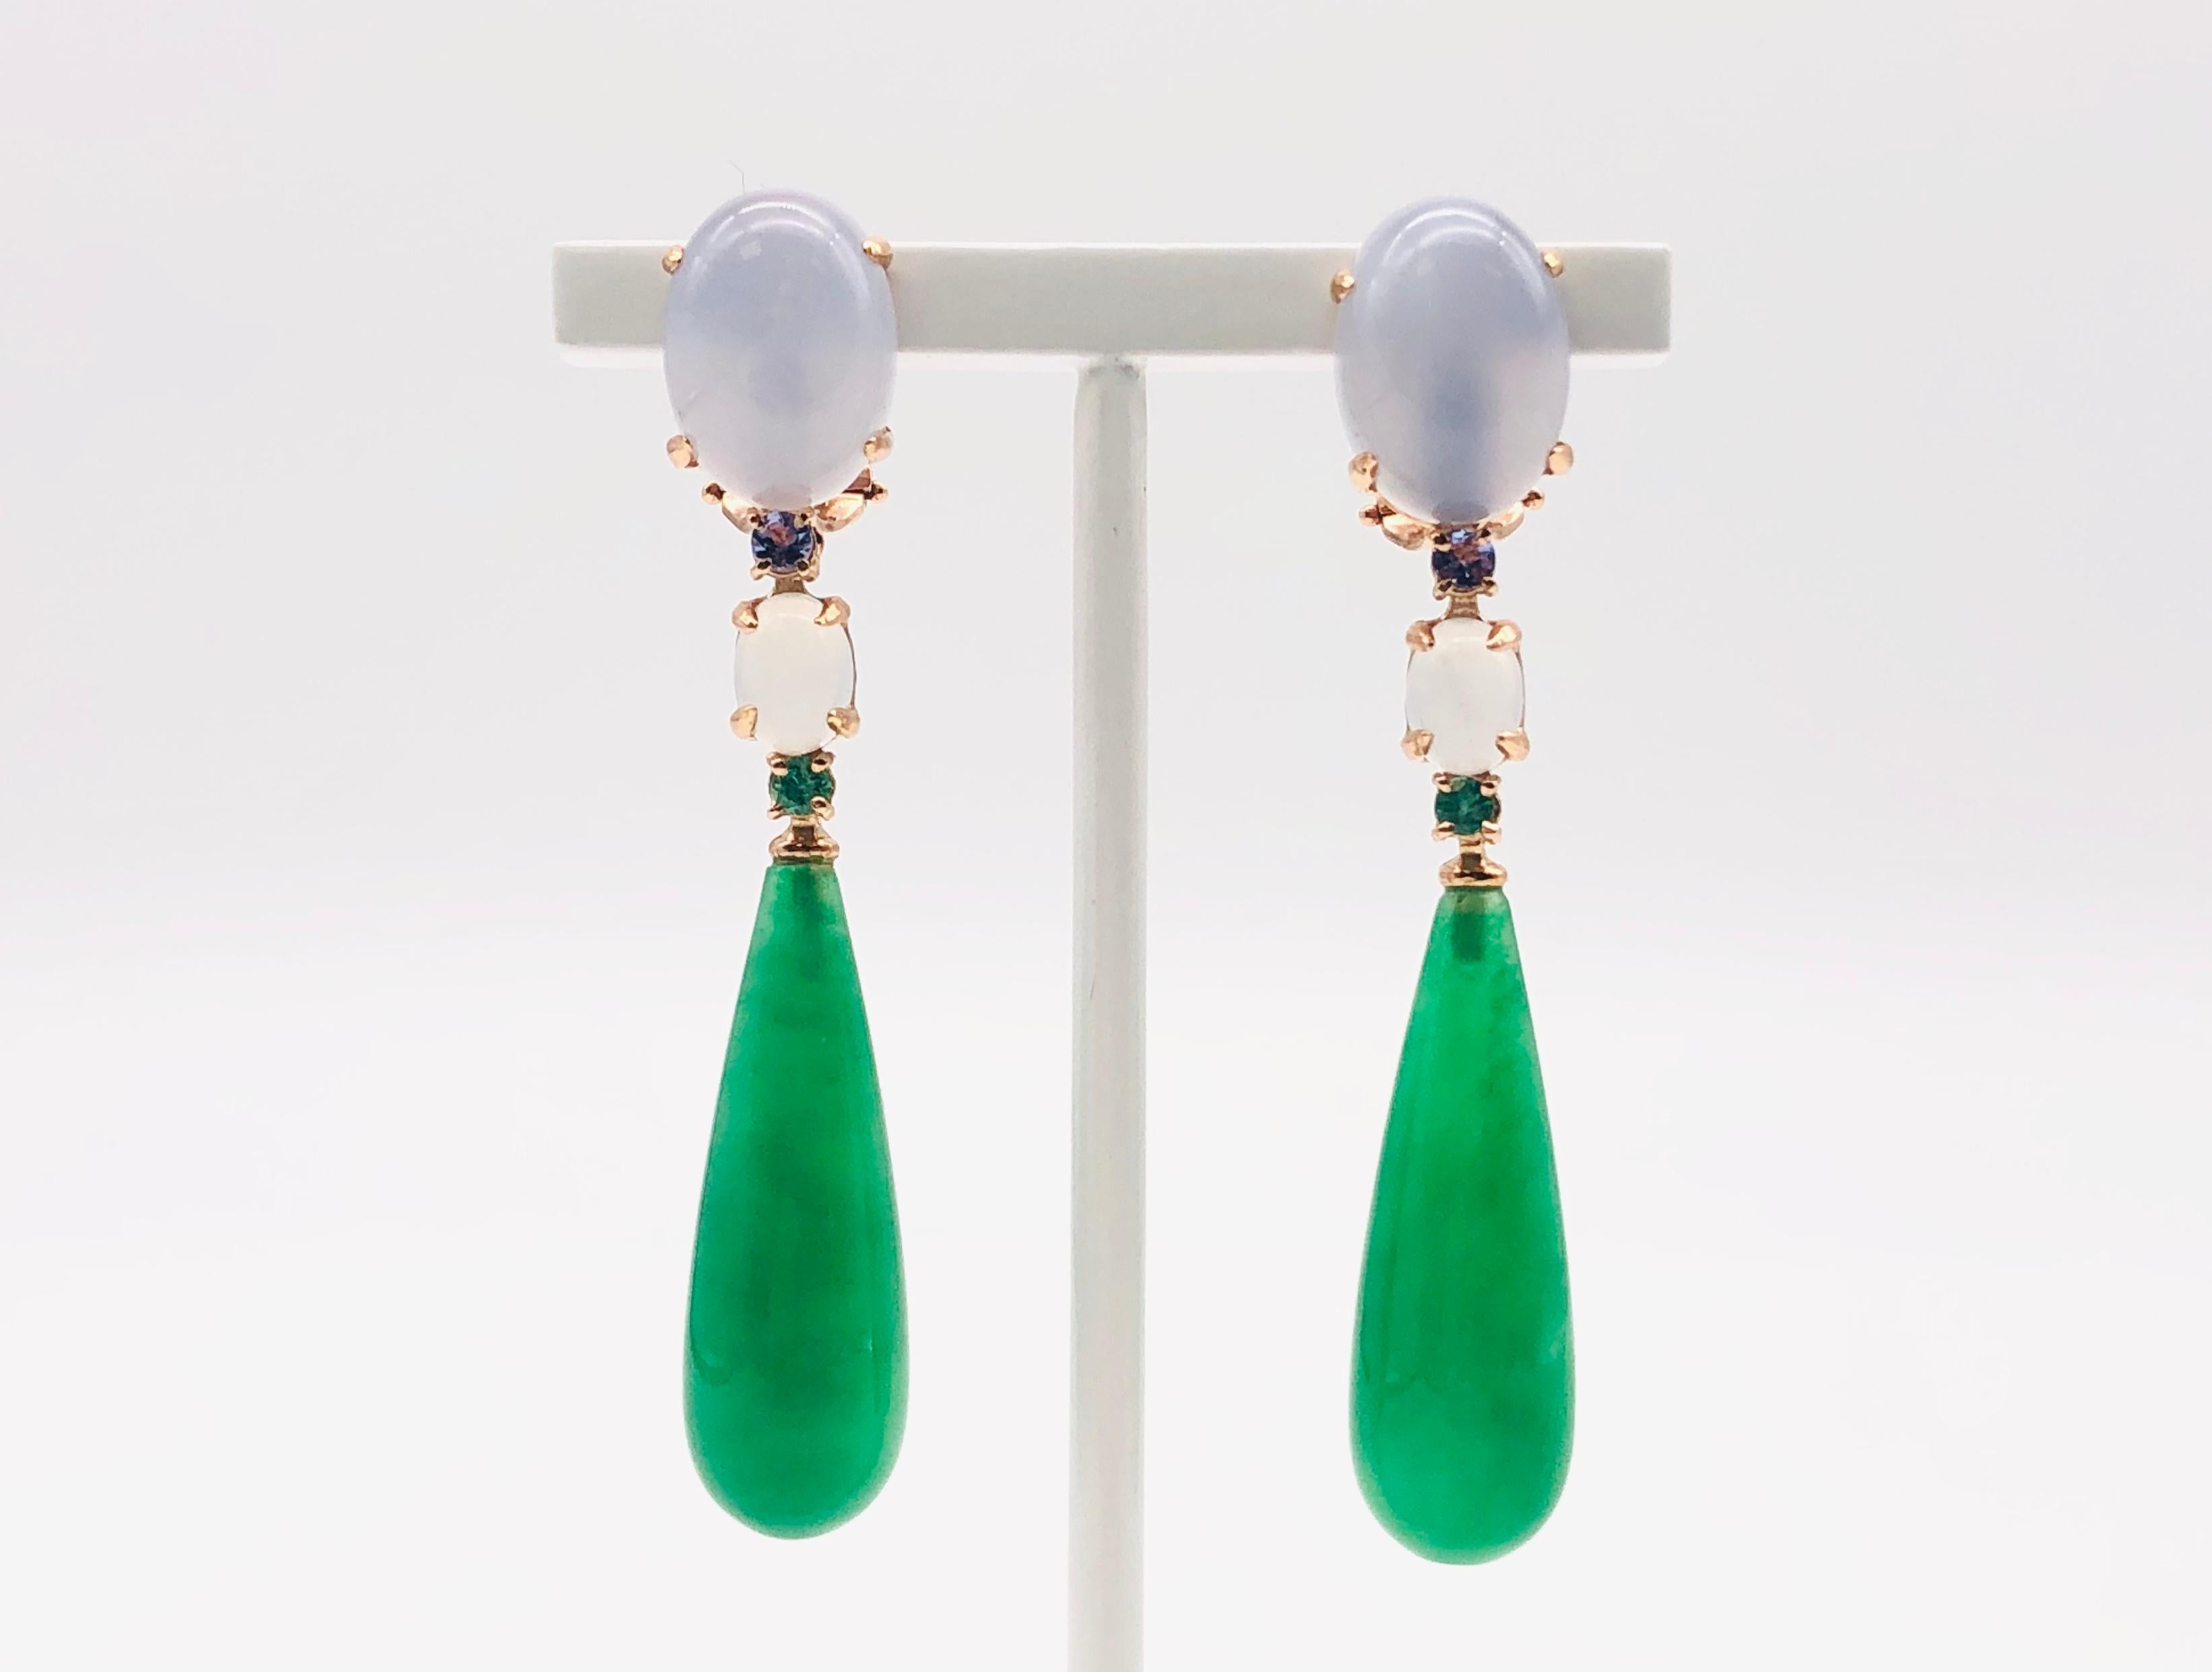 Discover these magnificent earrings in 18-carat yellow gold, a true work of art that harmoniously combines jade, tanzanite, chalcedony and emerald. Every detail of these earrings has been carefully designed to offer striking aesthetics and